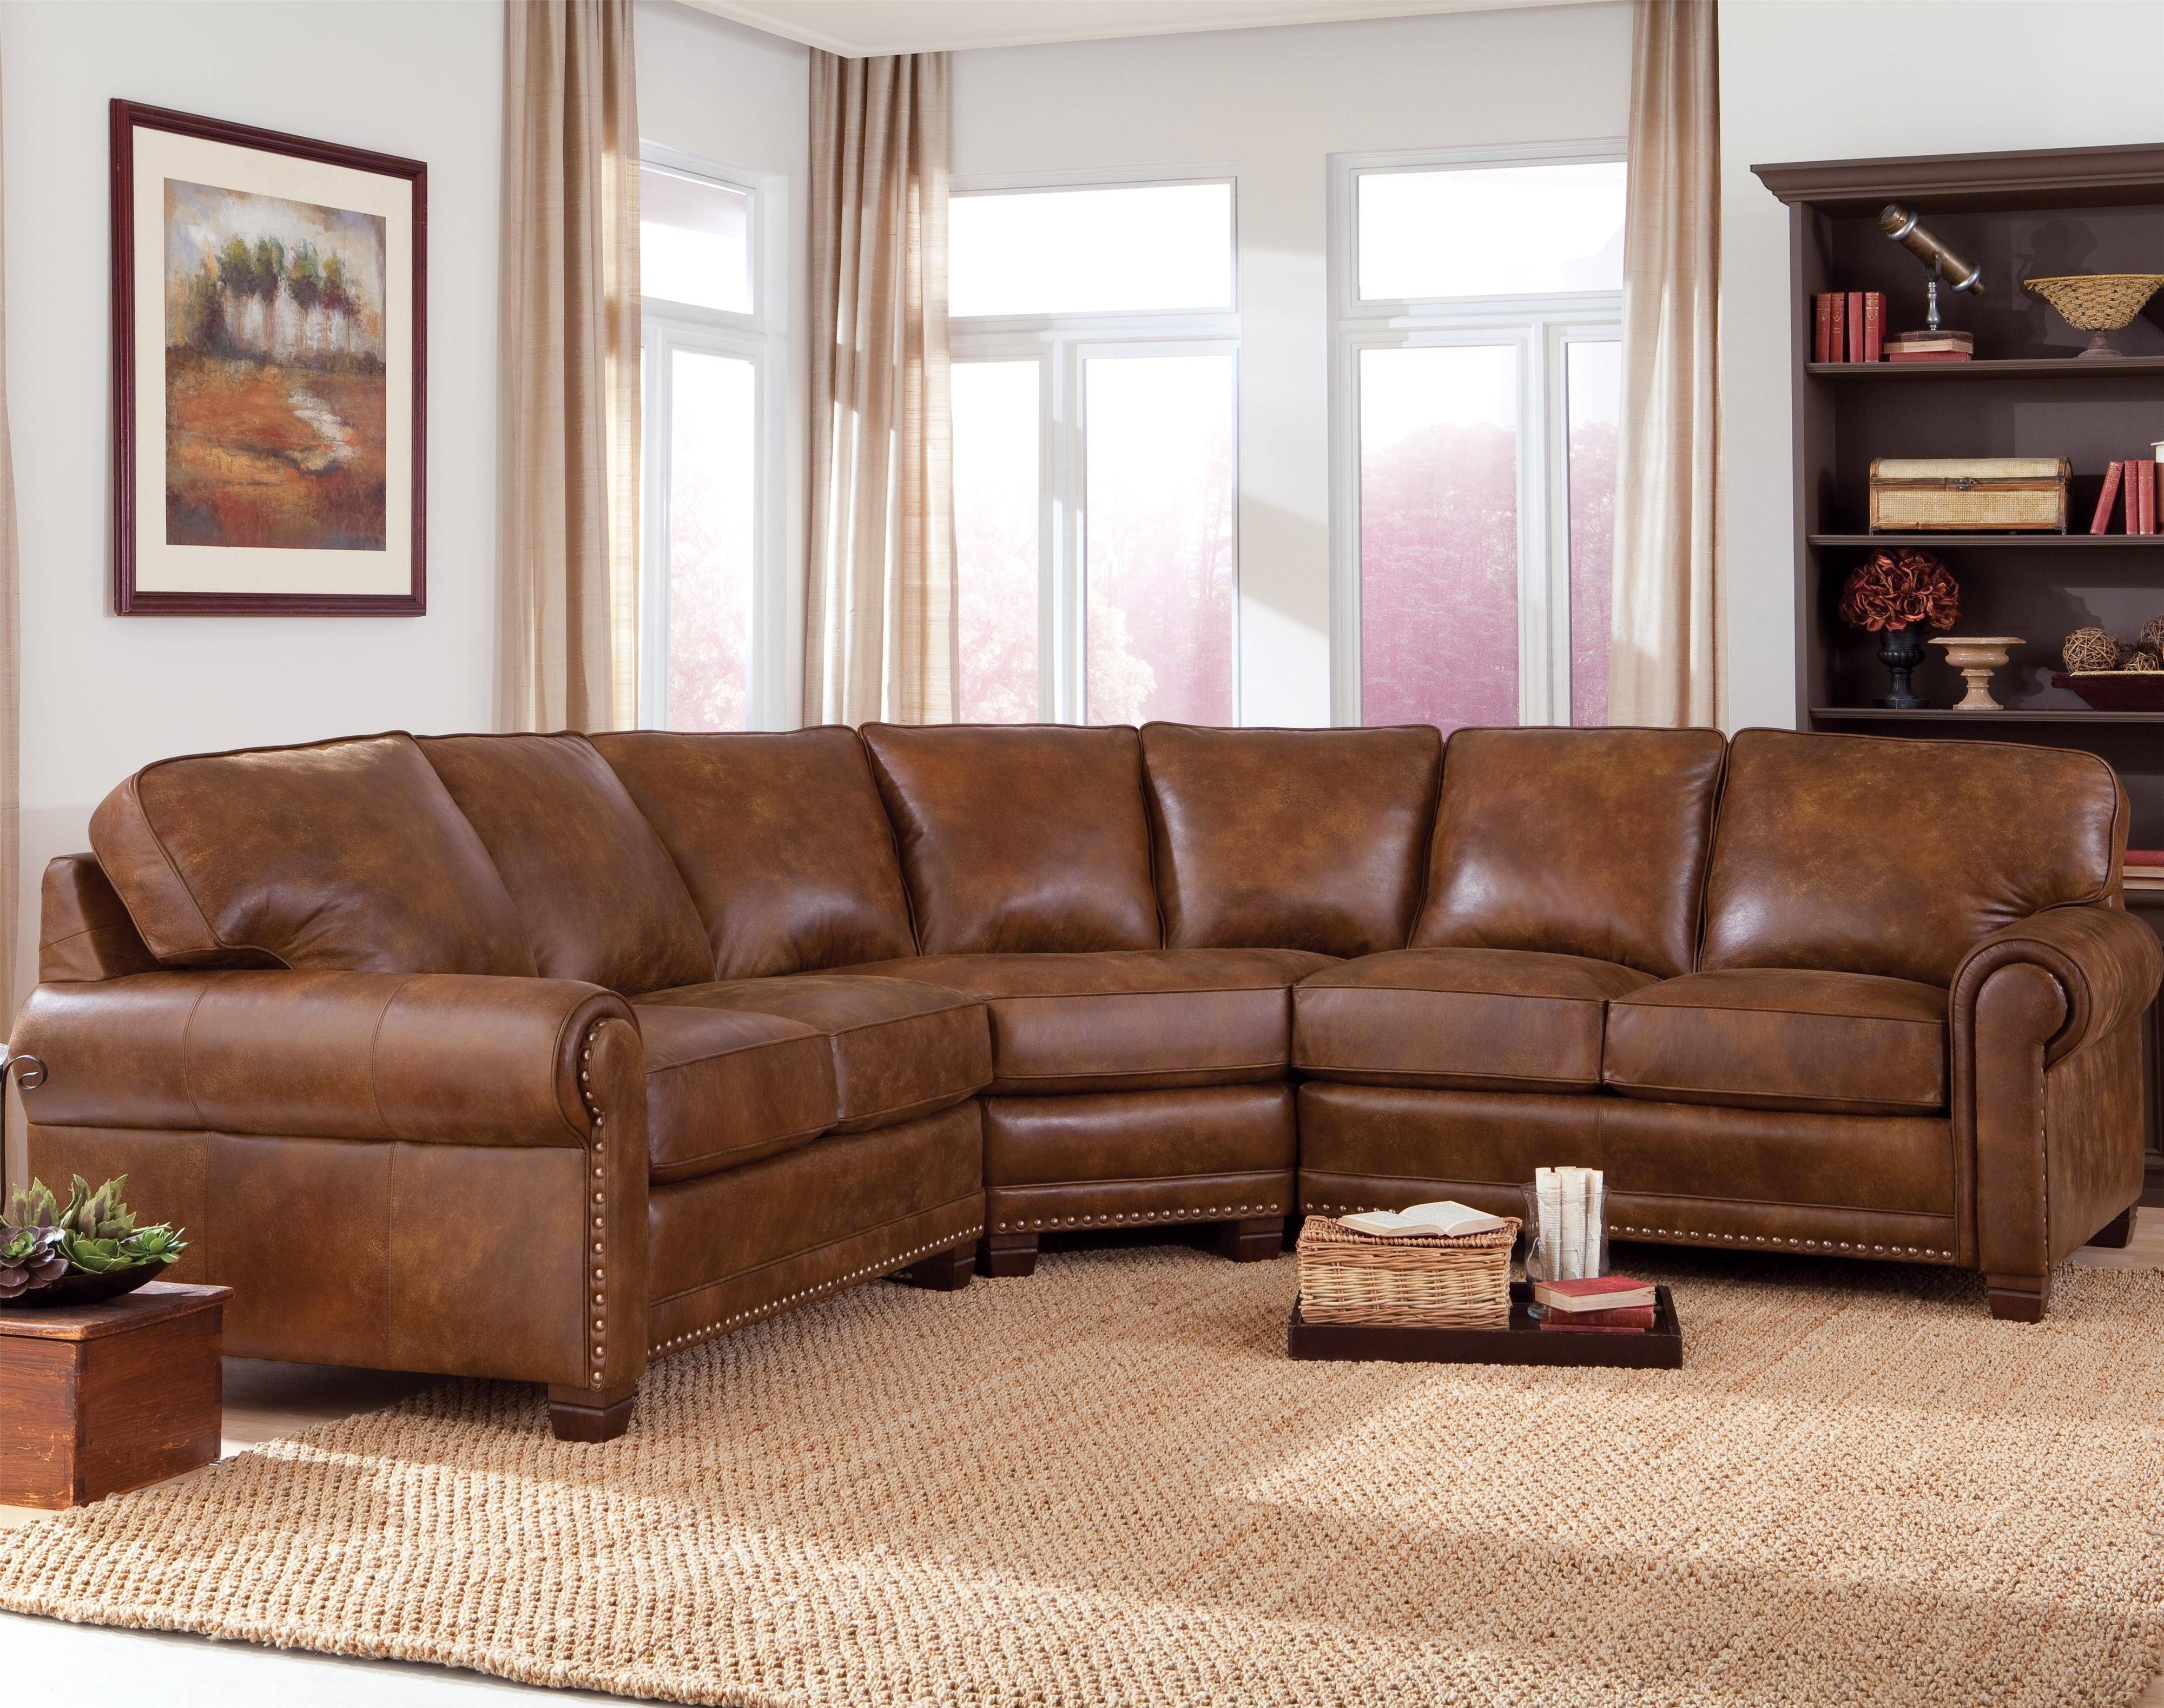 Light Brown Leather Sectional Sofa | Tehranmix Decoration Throughout Light Tan Leather Sofas (View 29 of 30)